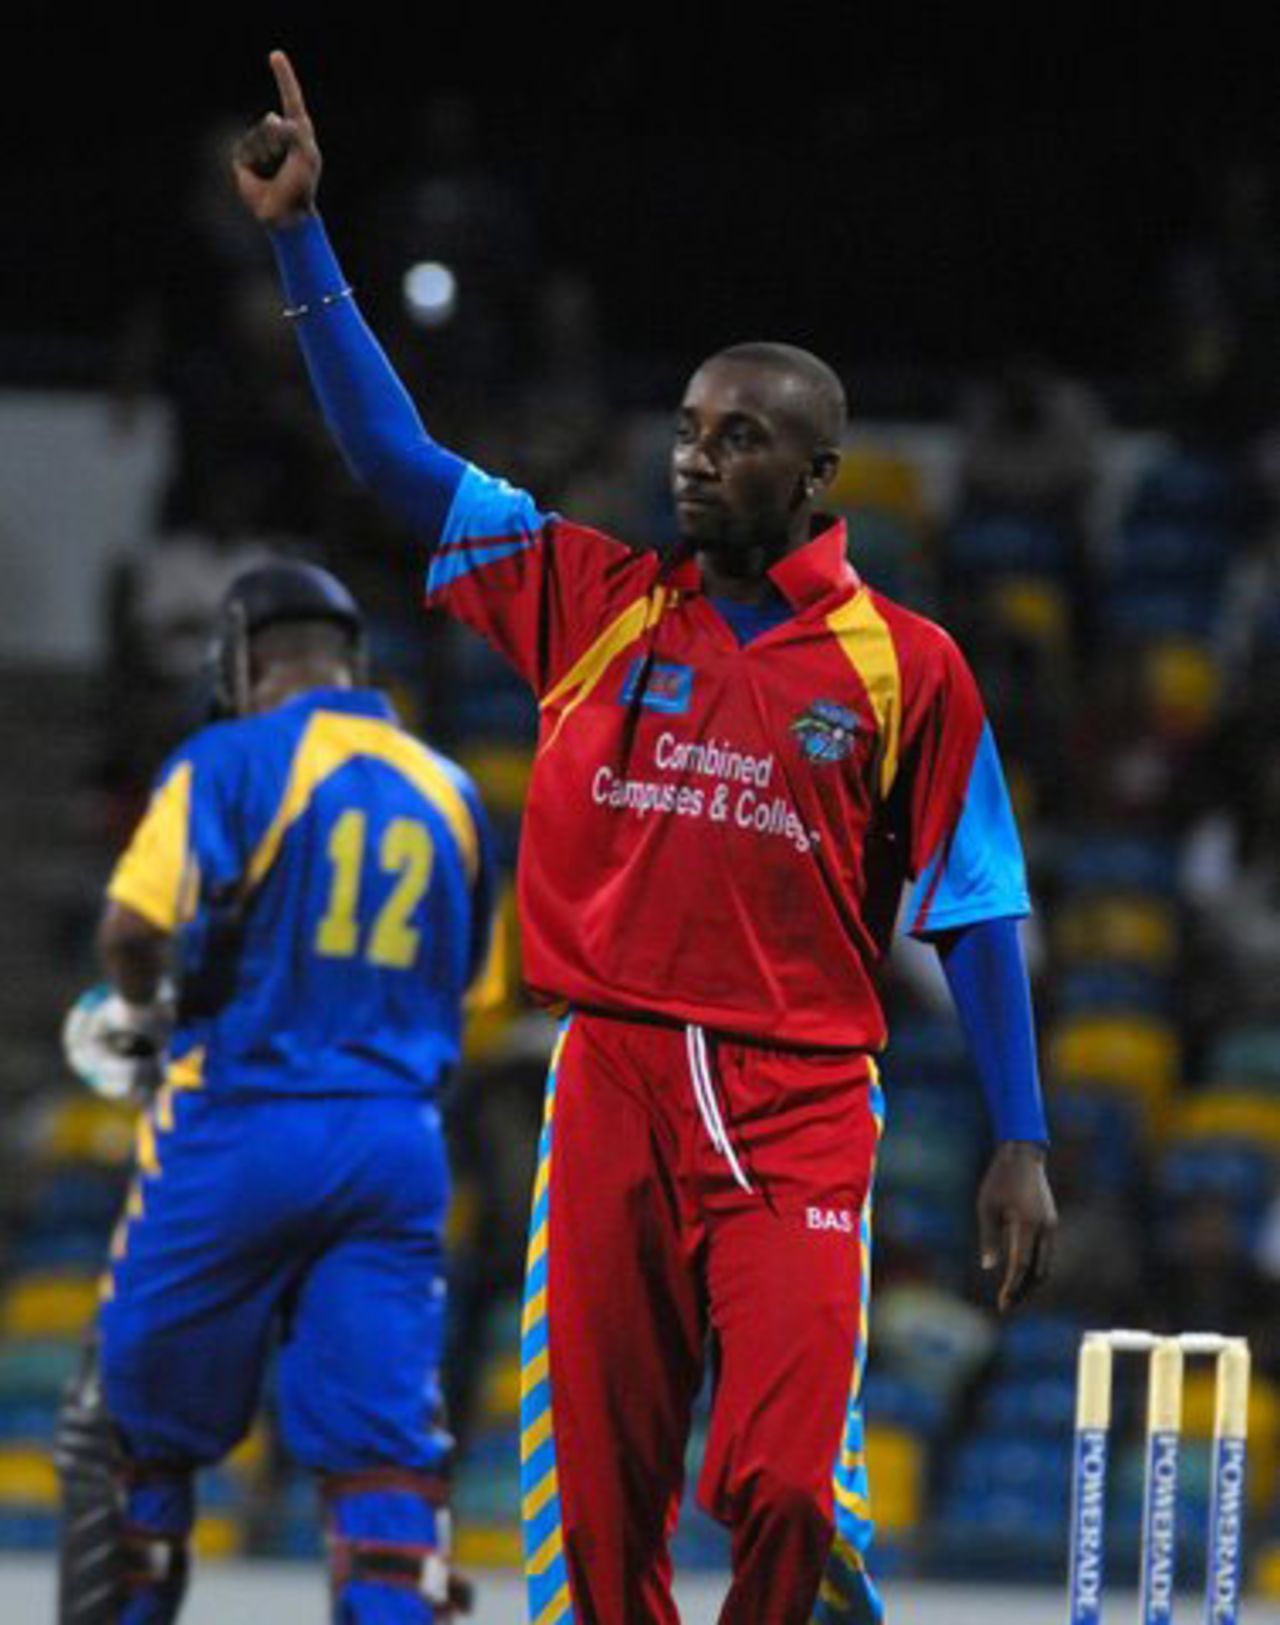 Nekoli Parris celebrates the end of Dwayne Smith, Barbados v Combined Colleges and Campuses, Caribbean T20, 4th match, July 23, 2010